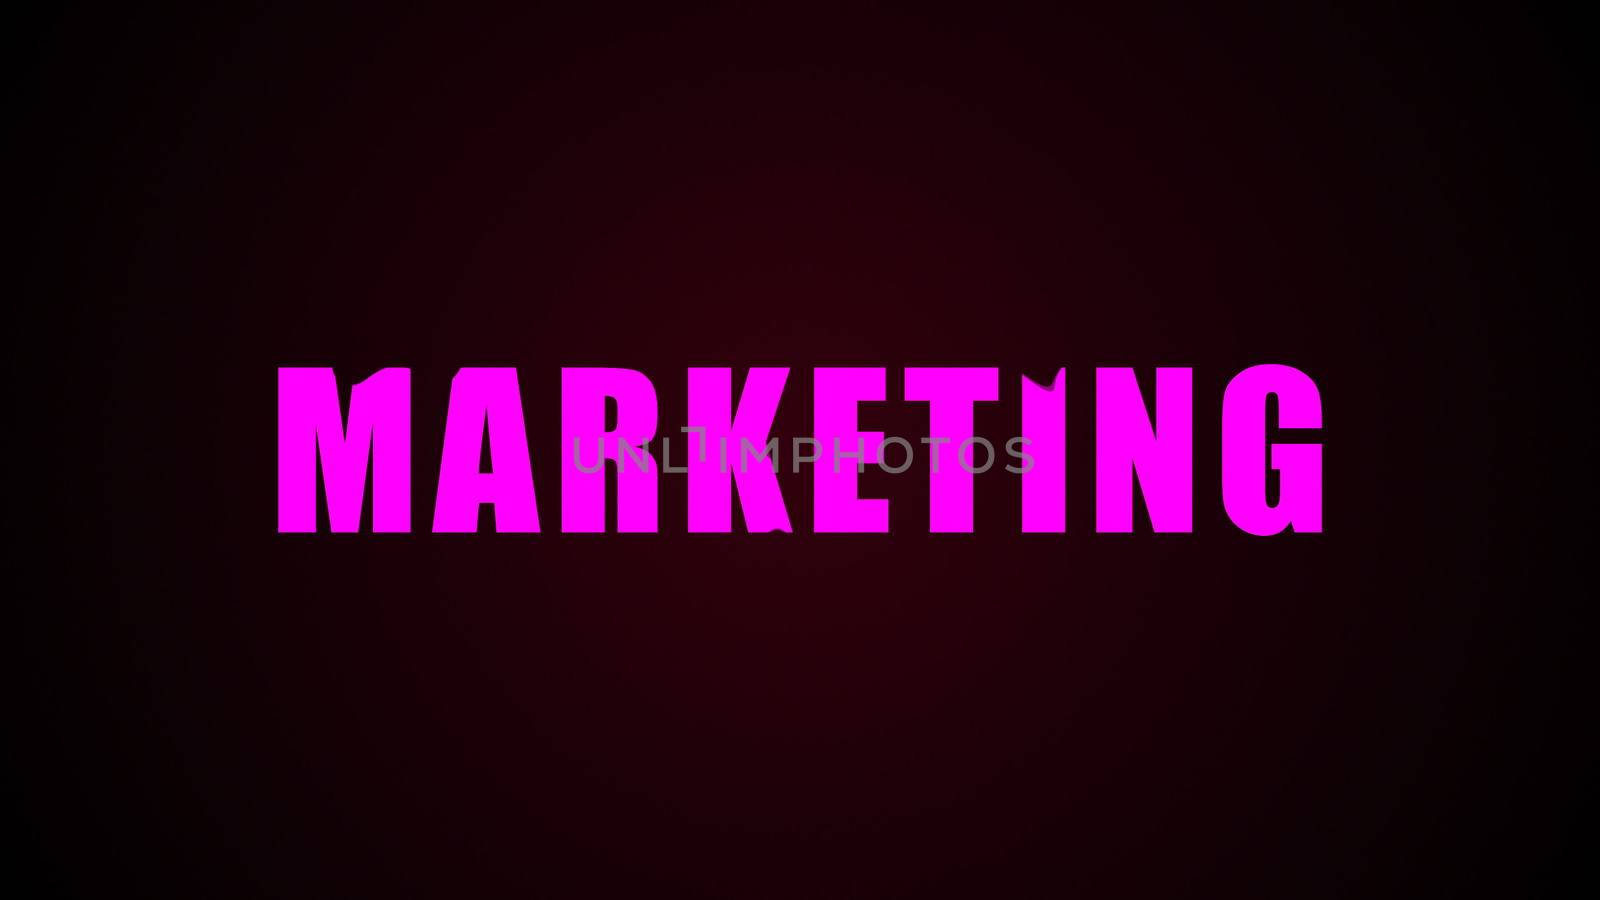 Marketing text. Abstract background. Digital 3d rendering